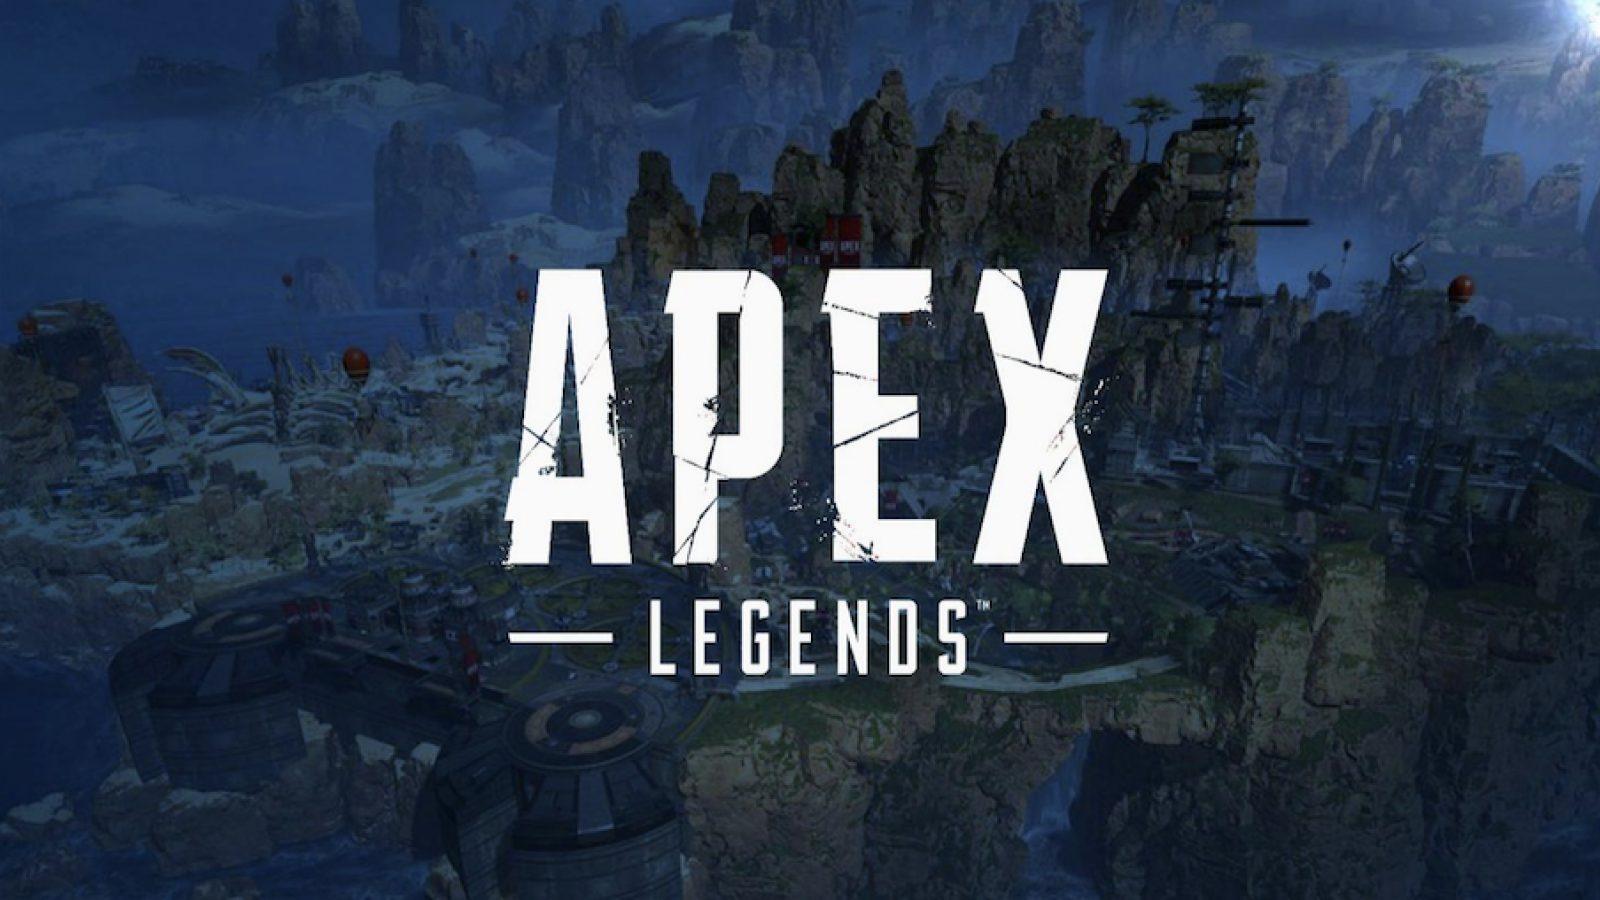 Here's what night mode in Apex Legends could look like